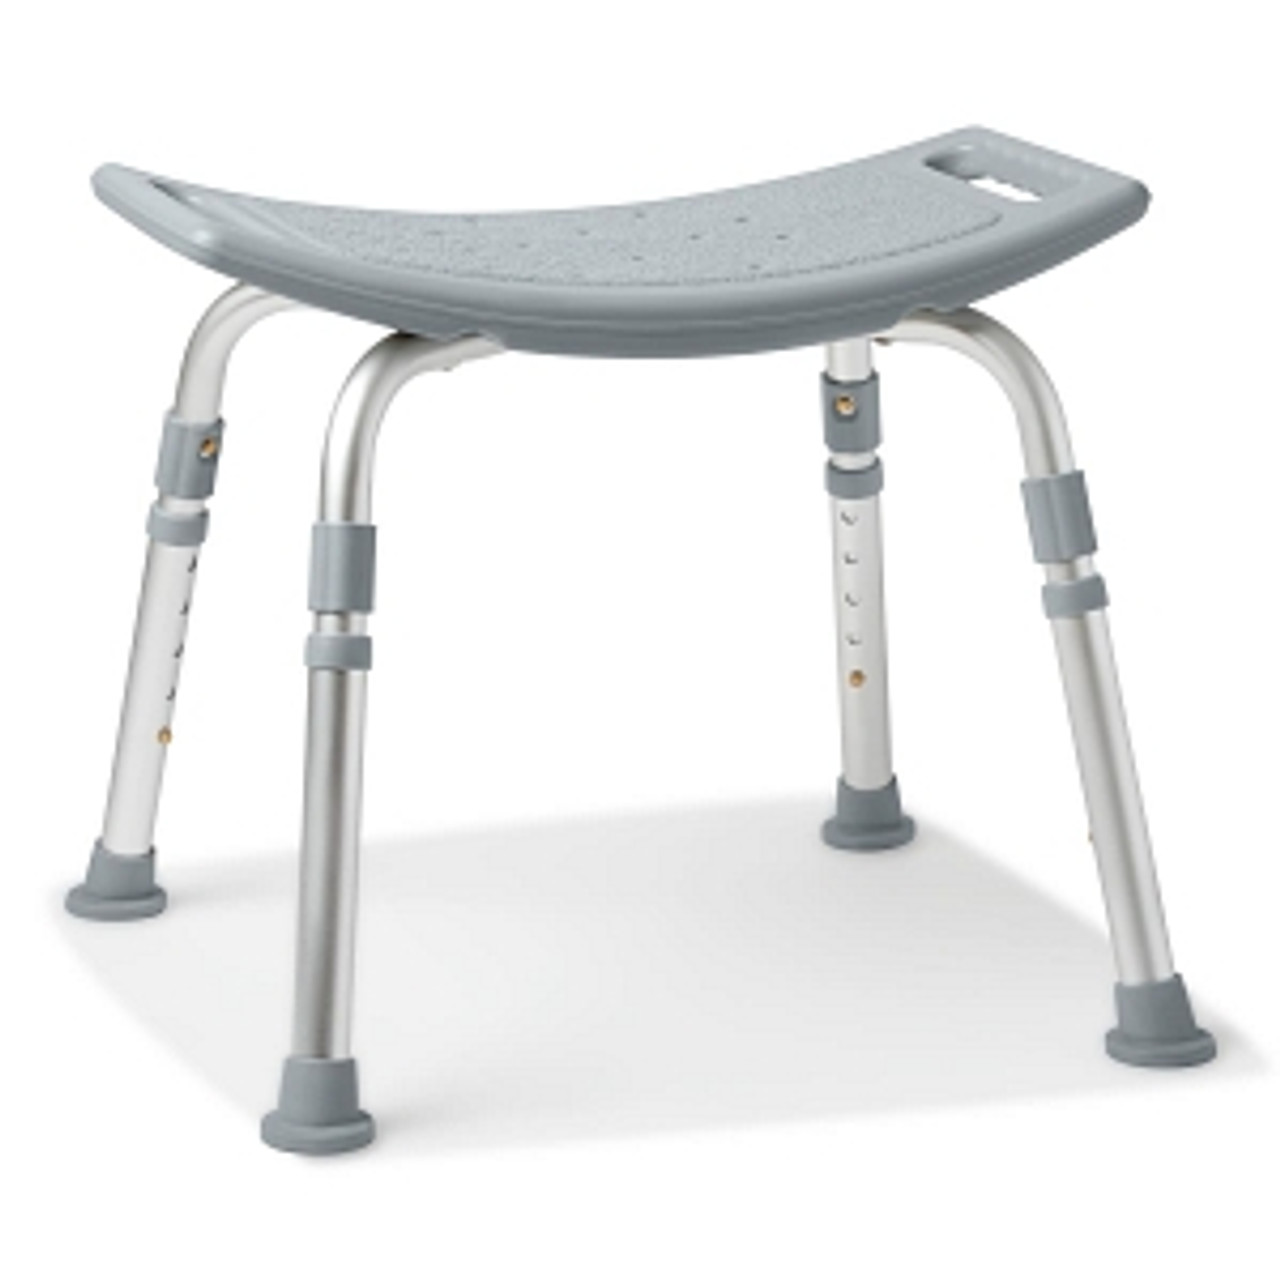 Shower chairs help patients who have difficulty sitting in a standard bathtub or standing in the shower
Stools without a back provide easy access and maneuverability when bathing
Legs are height adjustable for a proper fit